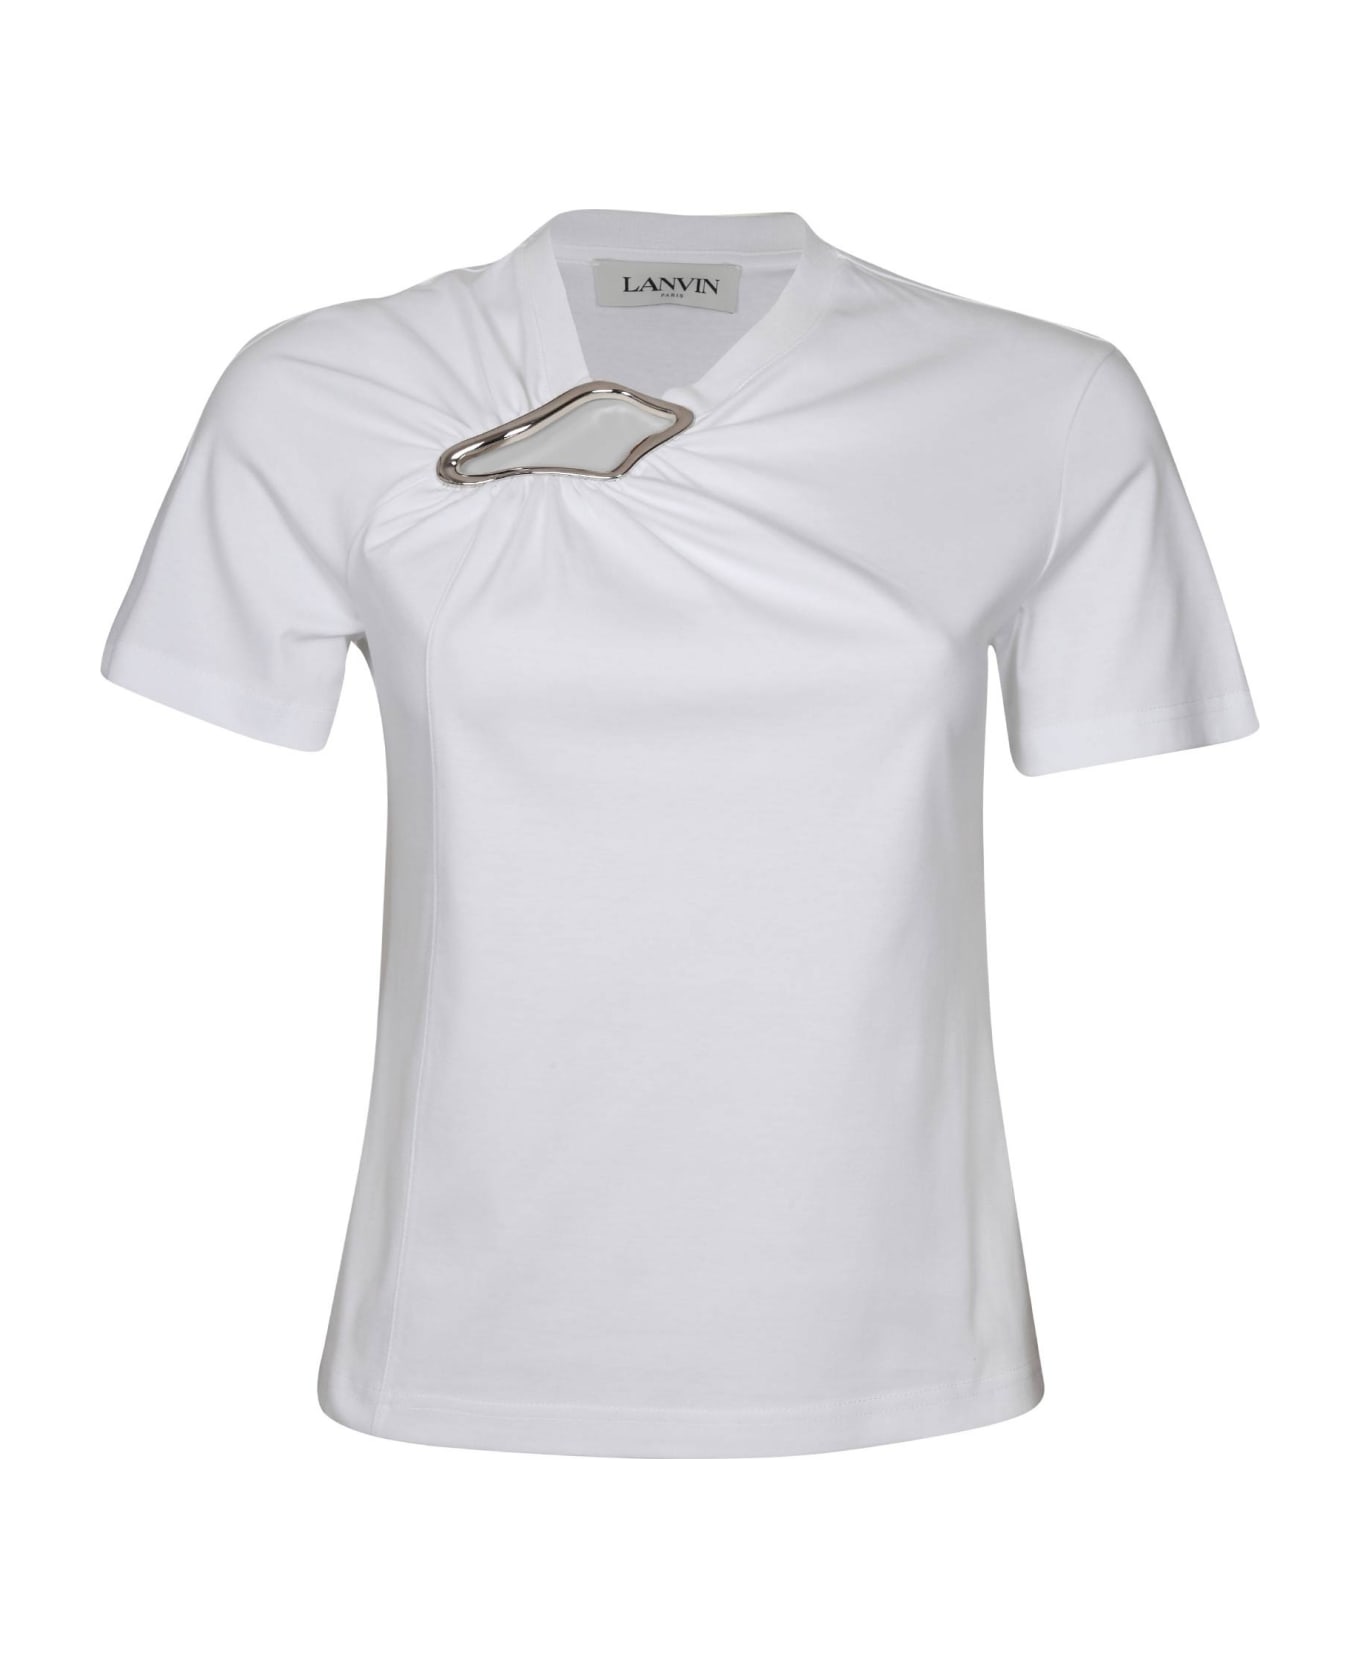 Lanvin Fitted Top In White Cotton - Optic White